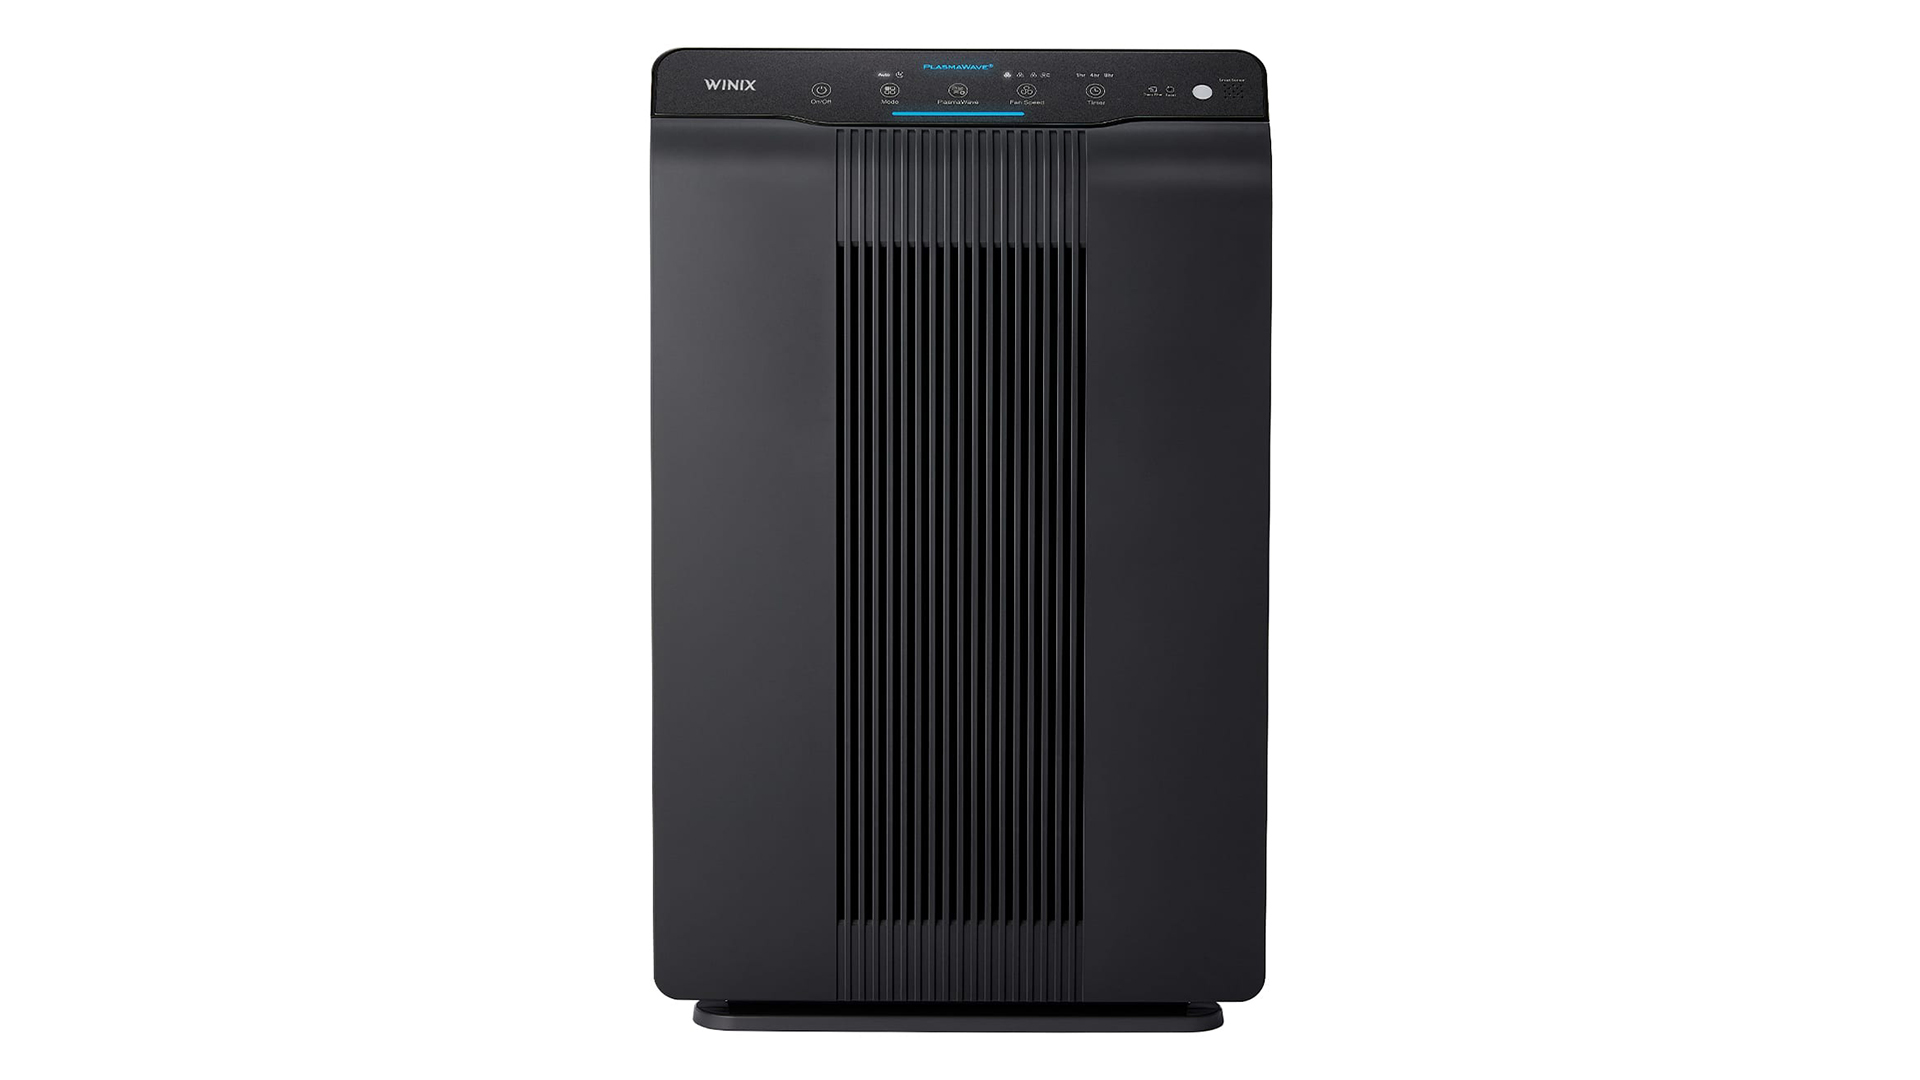 Air purifiers on sale: Product image of a Winix air purifier